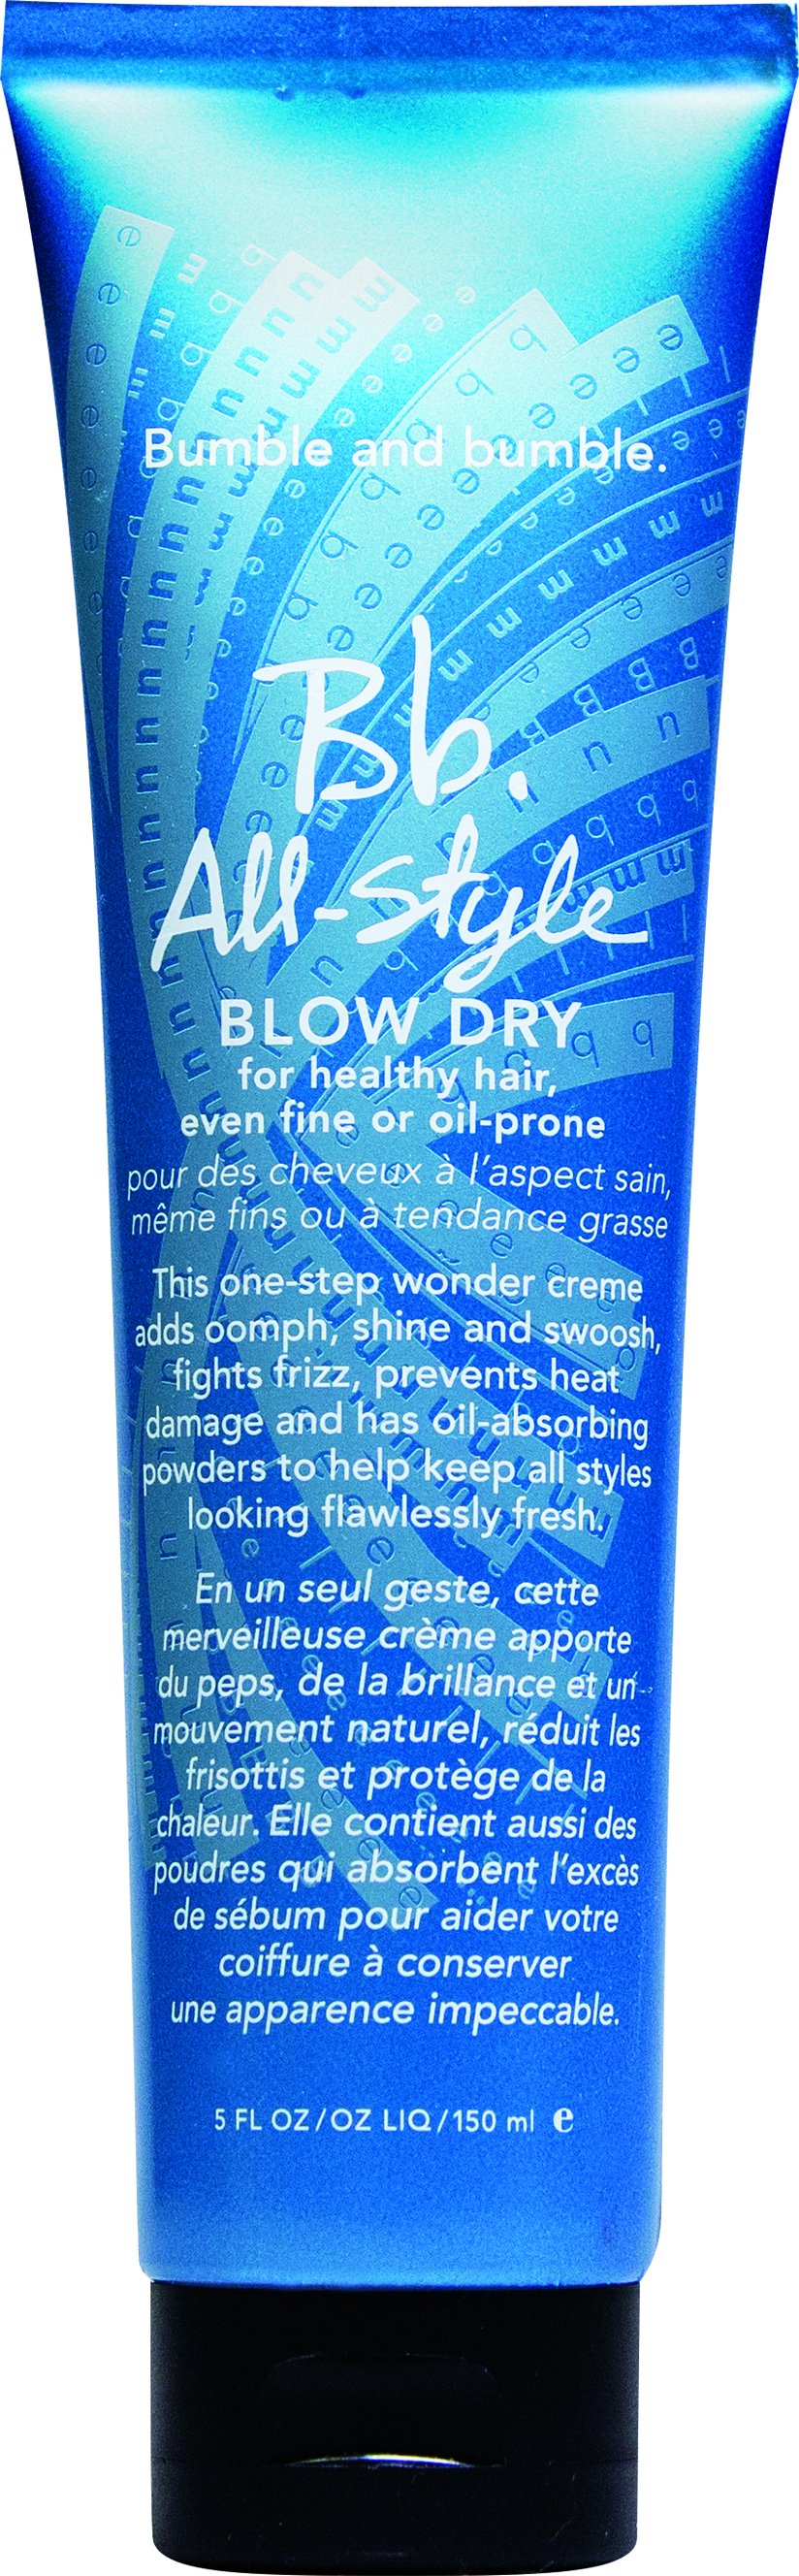 Bumble and bumble All Style Blow Dry 150ml